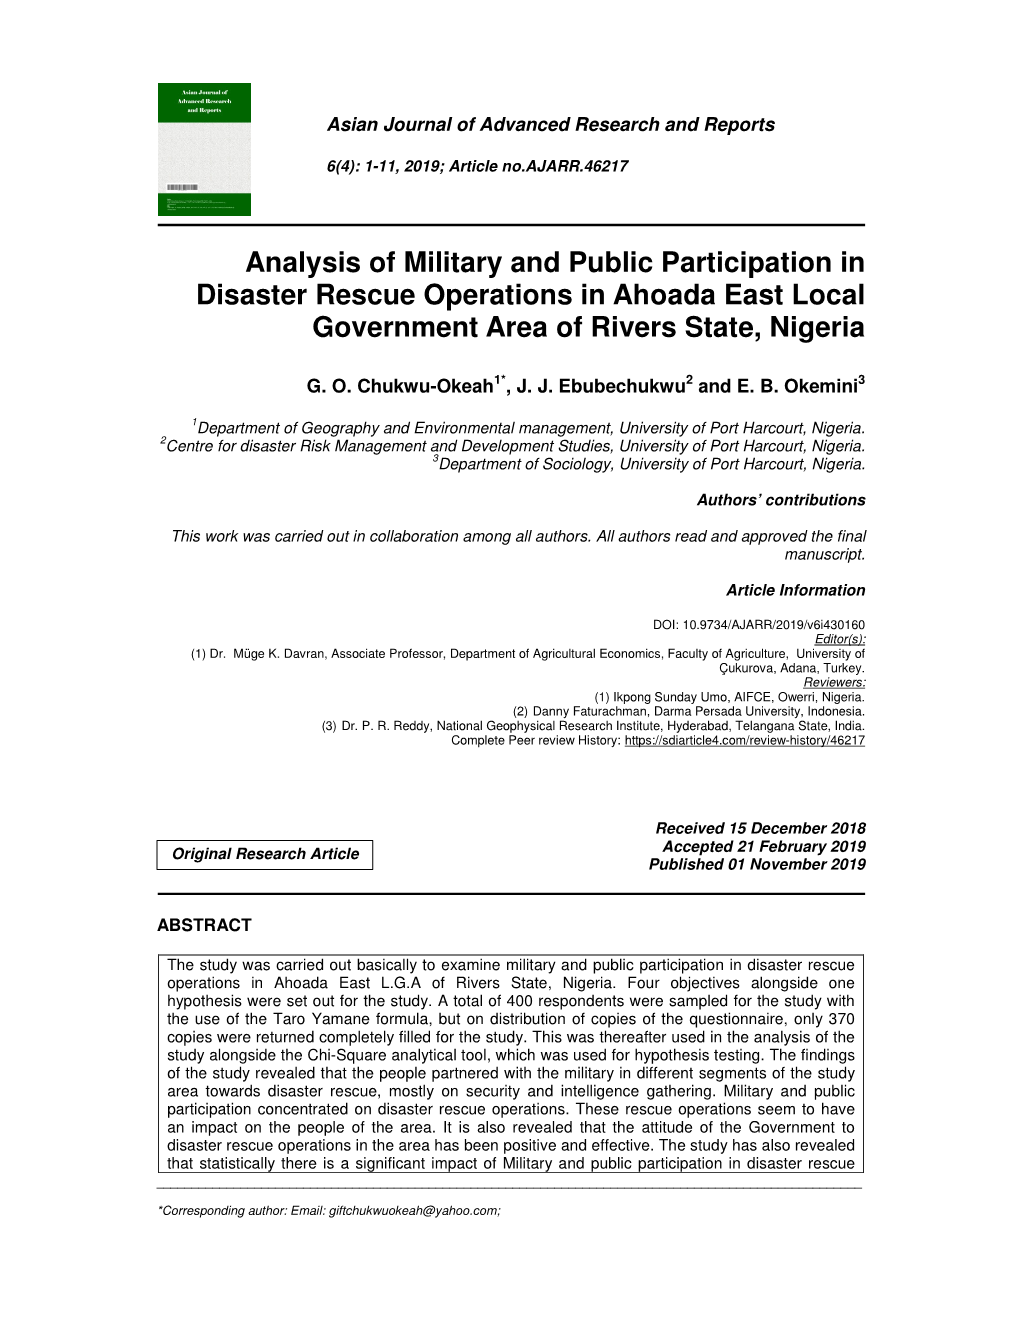 Analysis of Military and Public Participation in Disaster Rescue Operations in Ahoada East Local Government Area of Rivers State, Nigeria